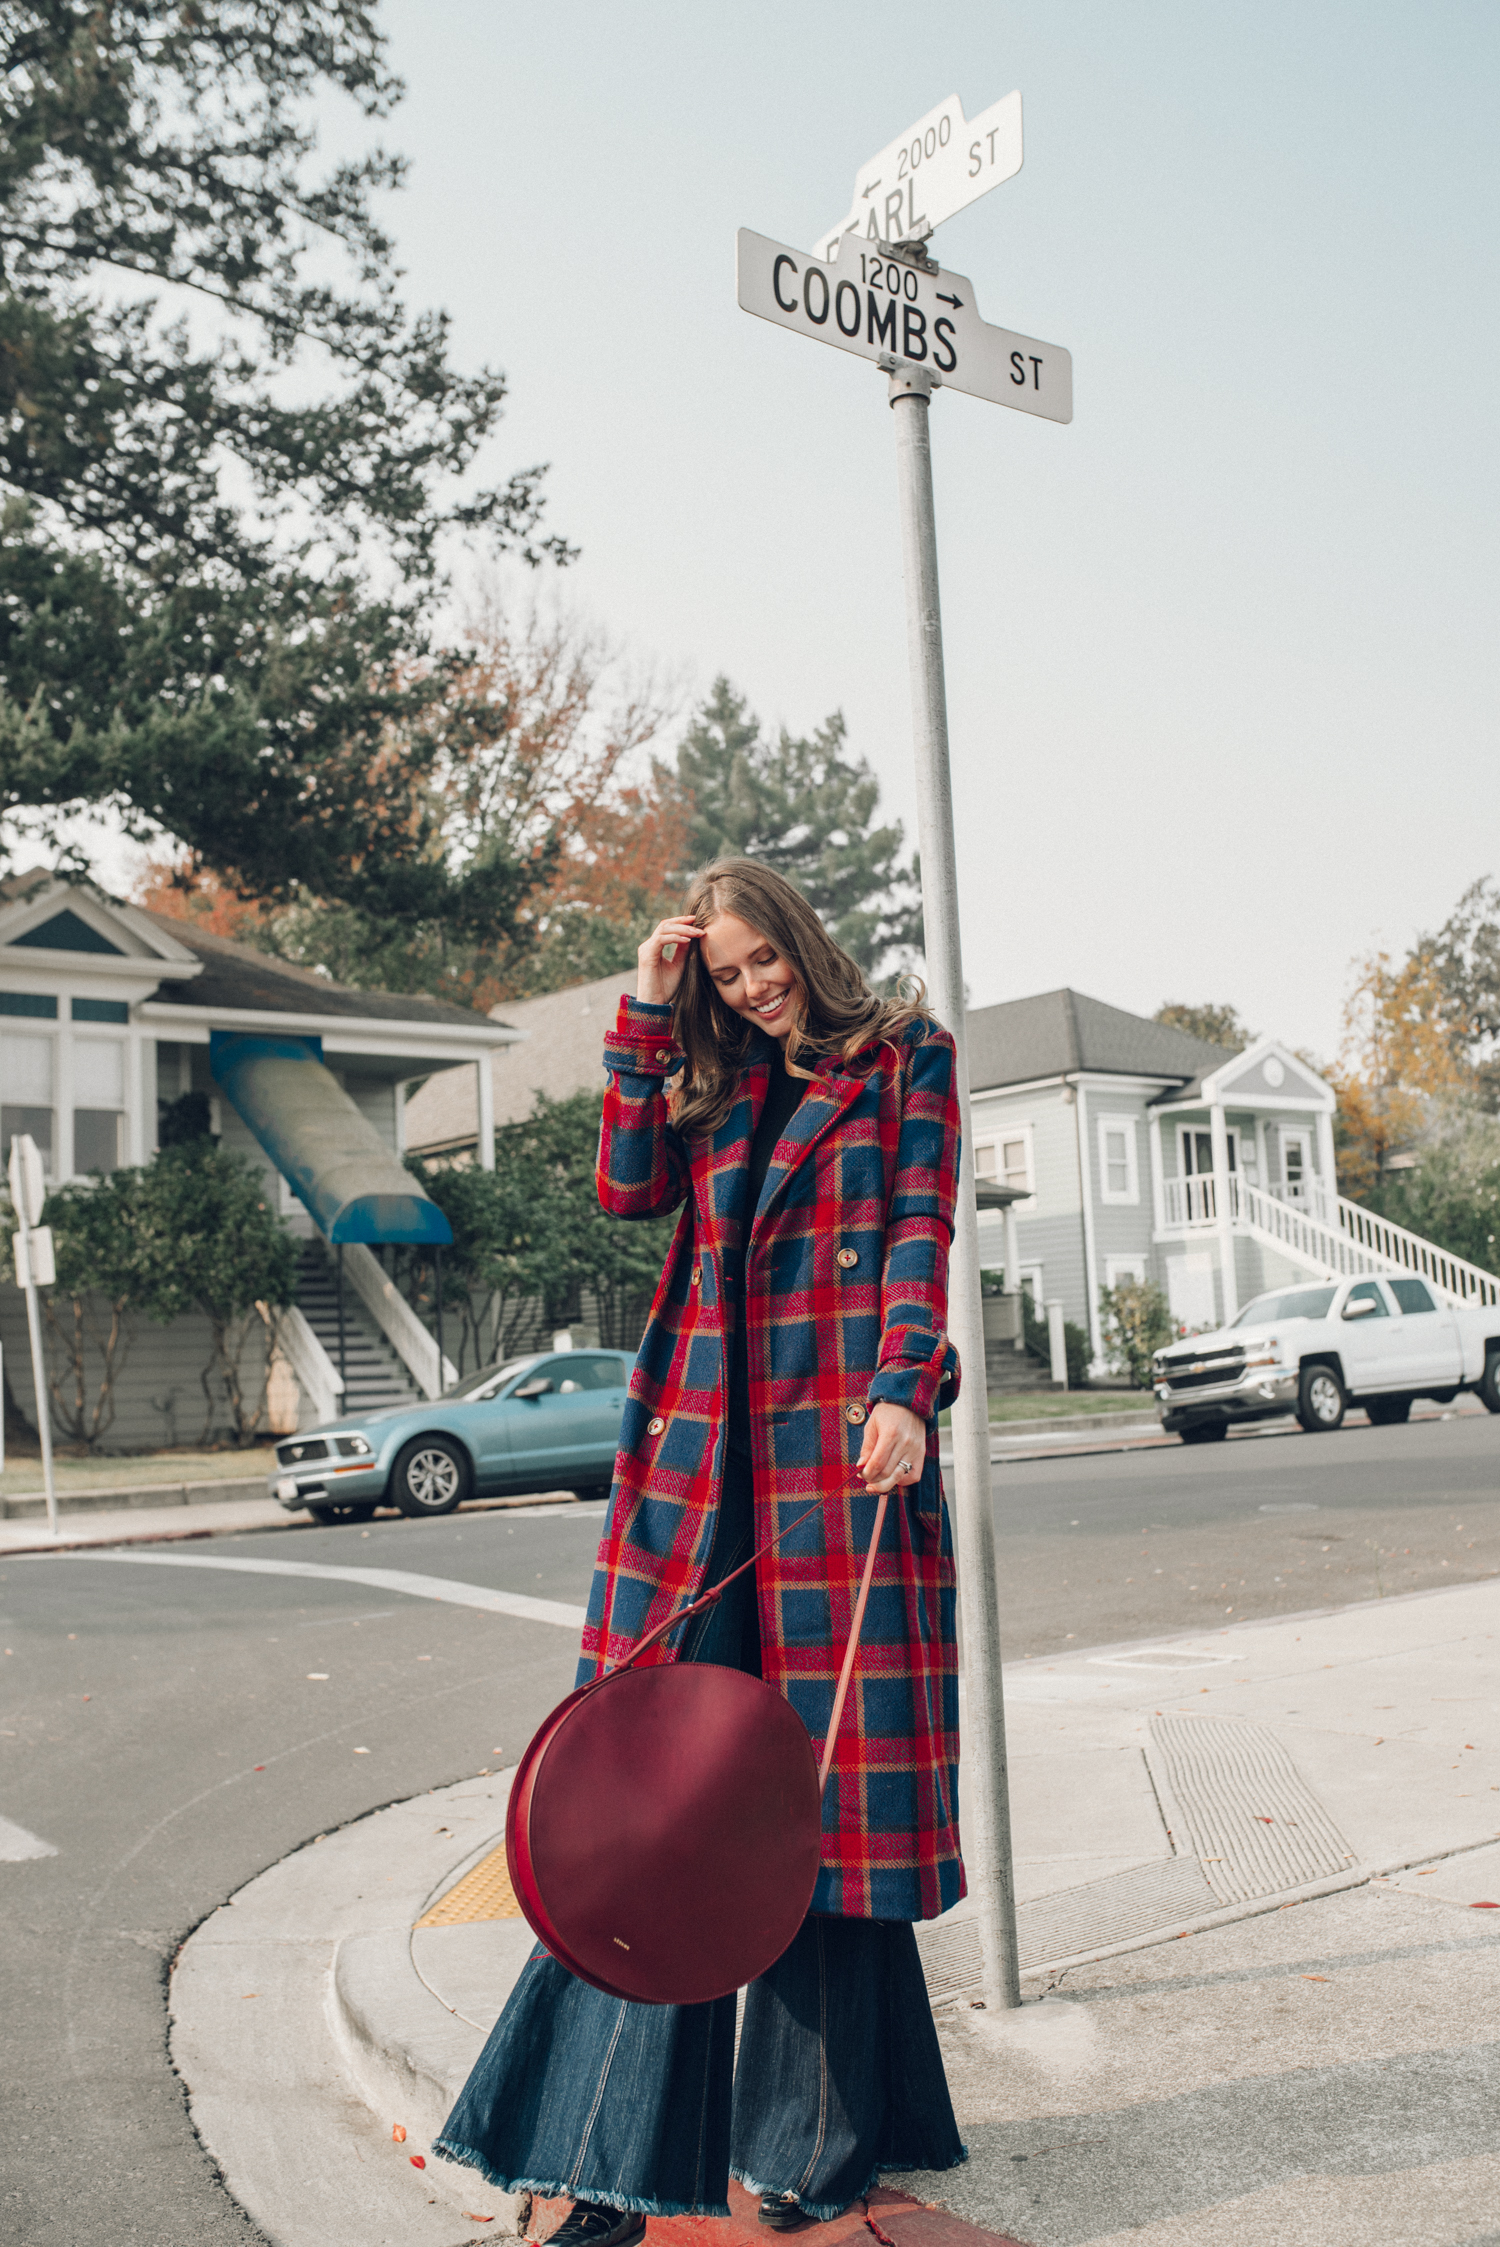 Alyssa Campanella of The A List blog visits Napa for Cabernet season 2018 wearing House of Harlow 1960 Howard coat from Revolve